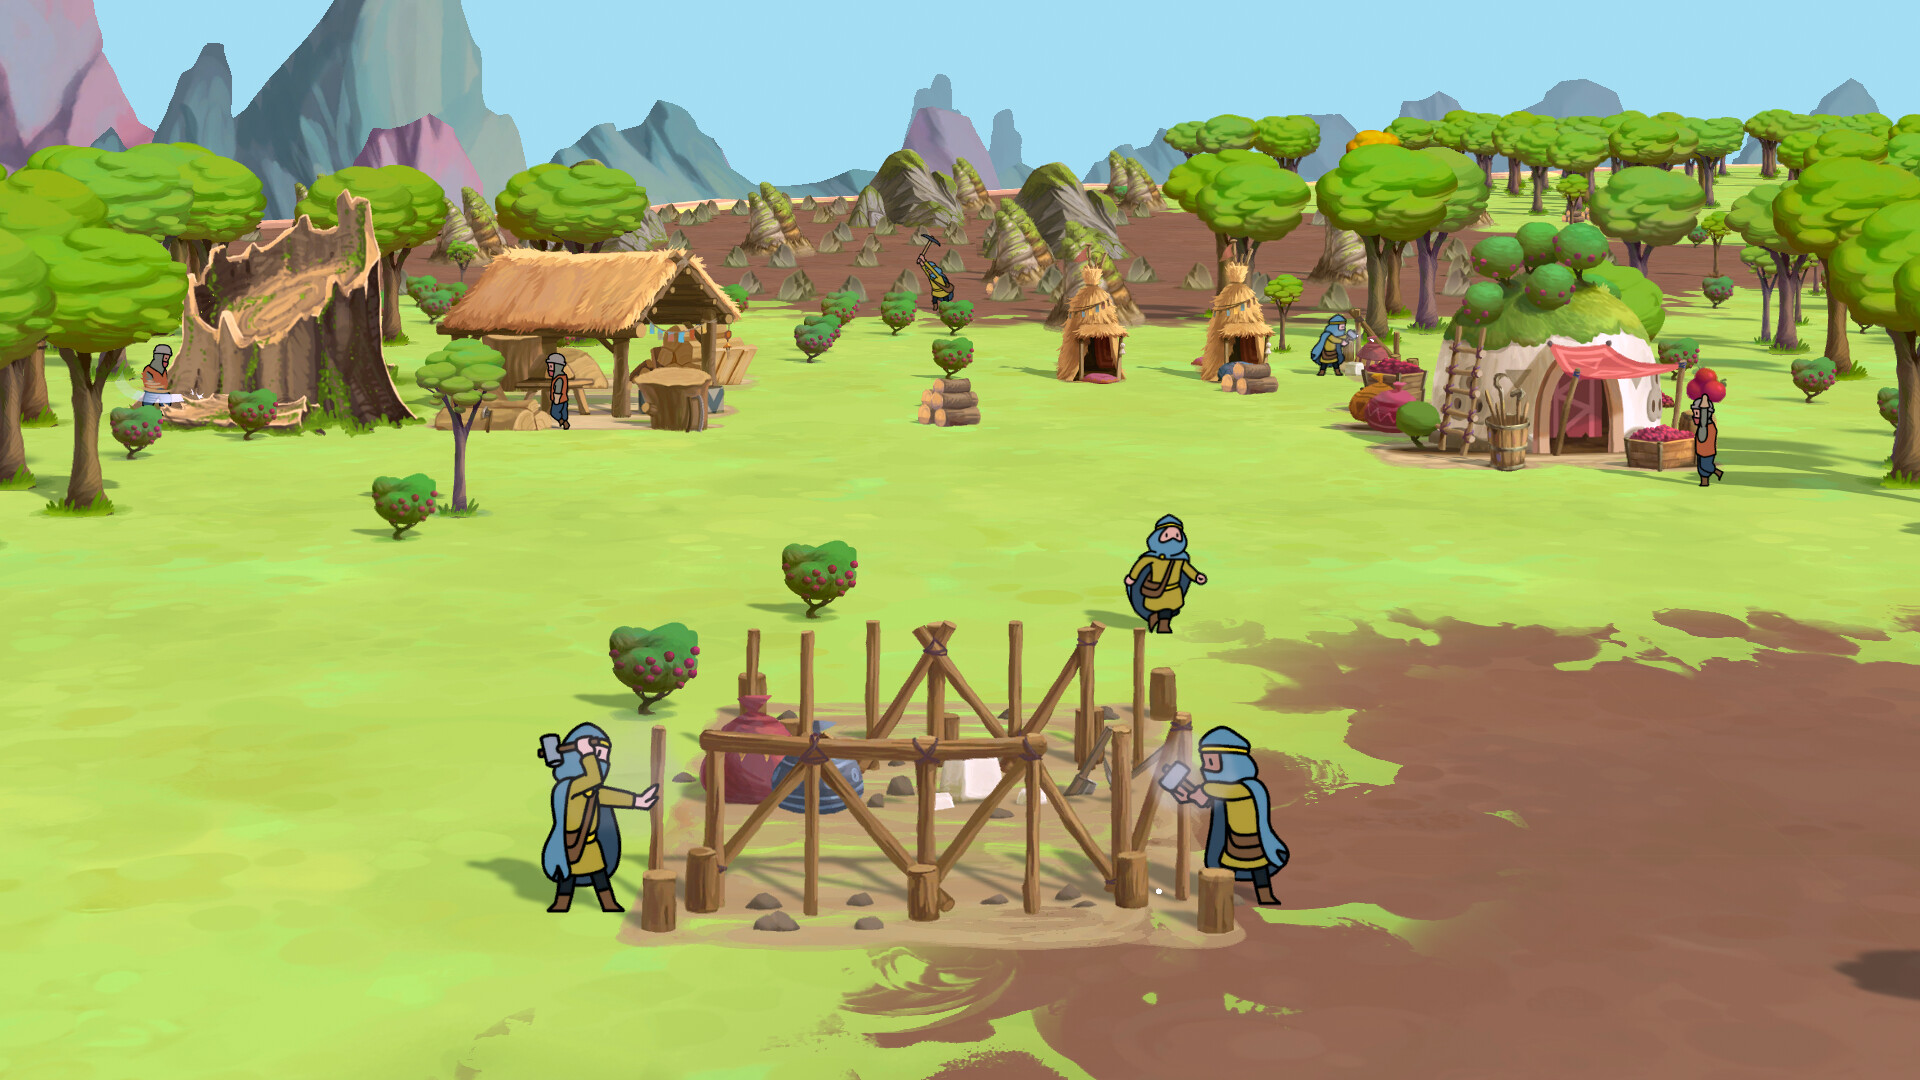 The Wandering Village Free Download